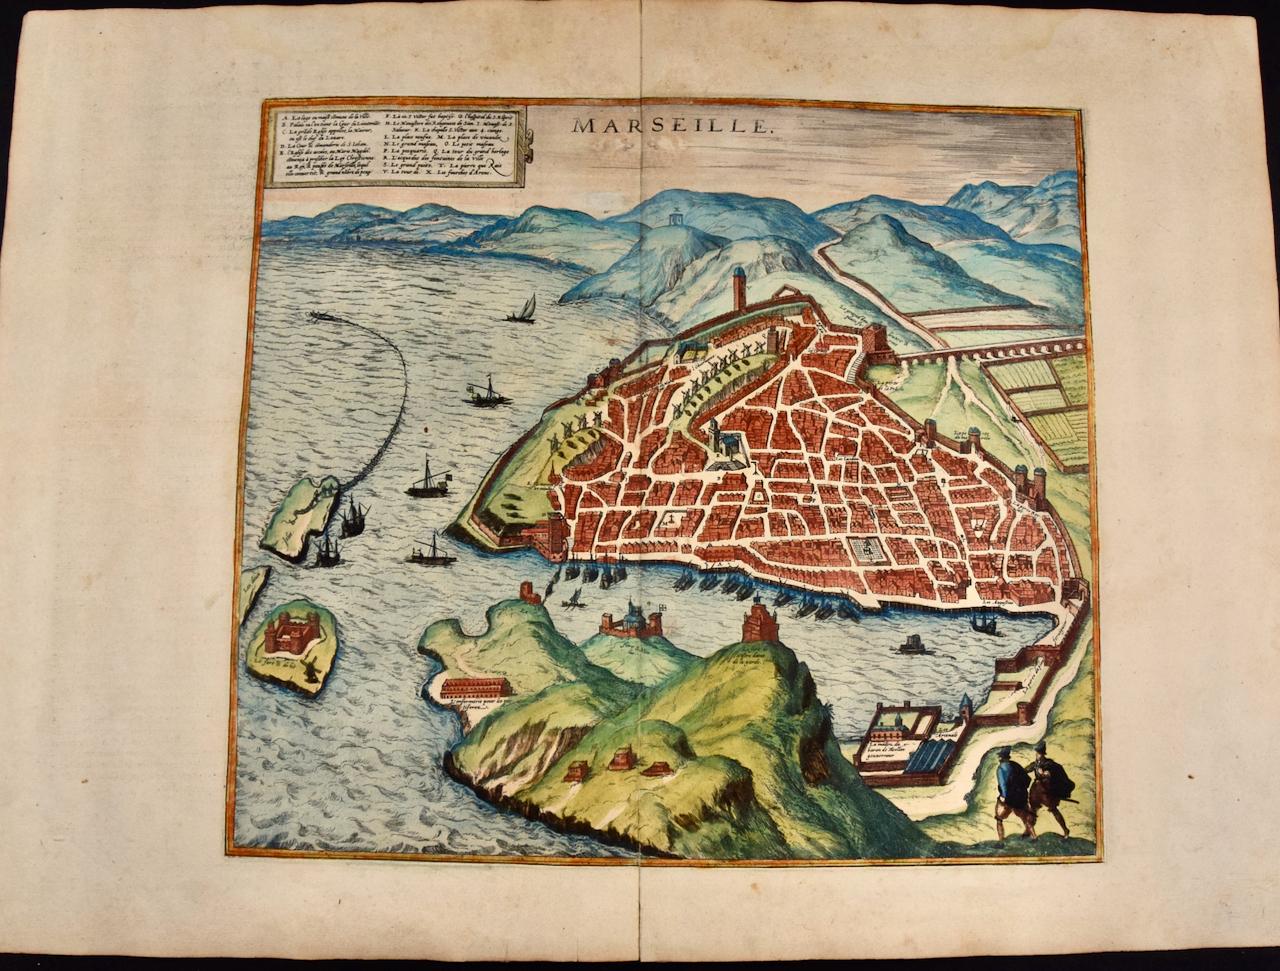 Map of Marseilles, France: A 16th Century Hand-colored Map by Braun & Hogenberg